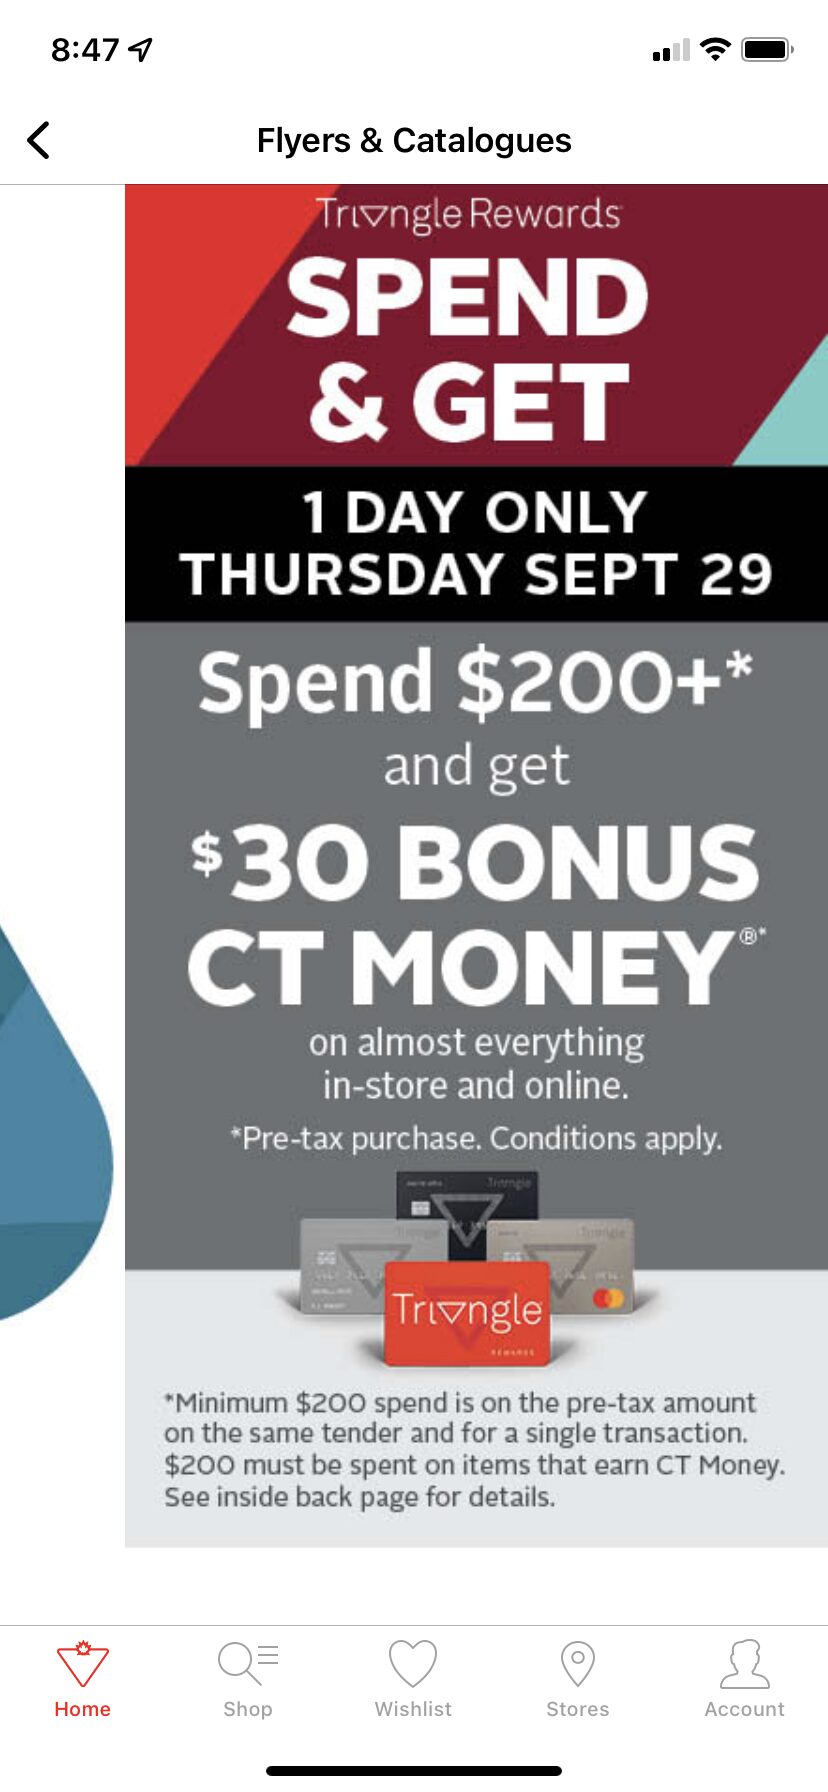 Canadian Tire] Spend $200 Get $30 in Canadian Tire Money (Sept 29 only) -  RedFlagDeals.com Forums